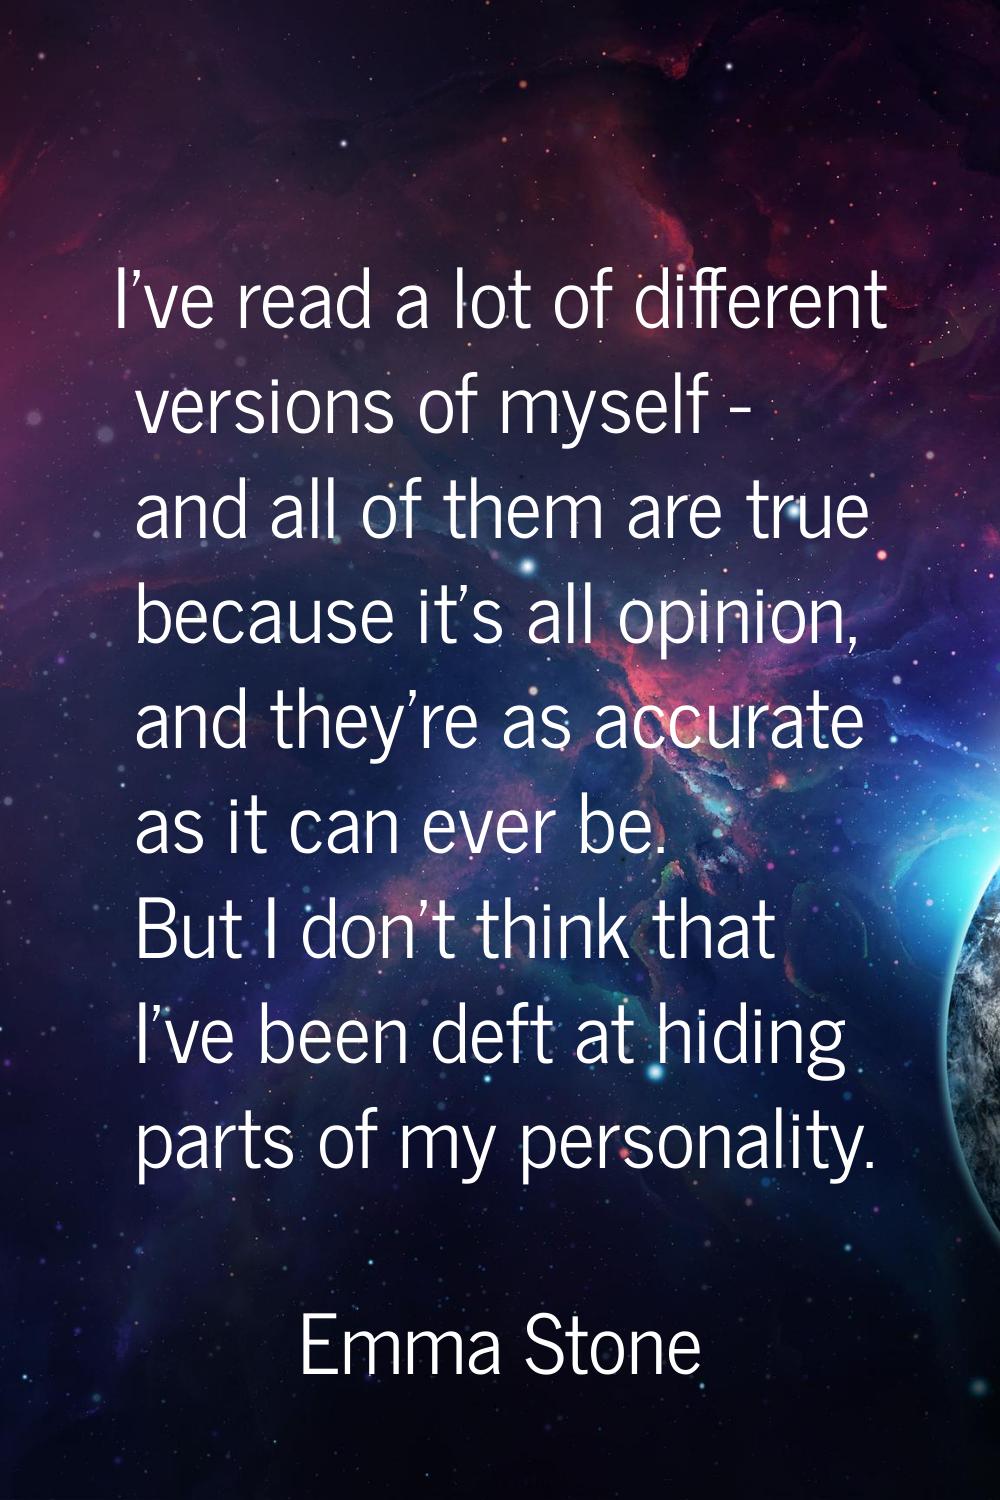 I've read a lot of different versions of myself - and all of them are true because it's all opinion